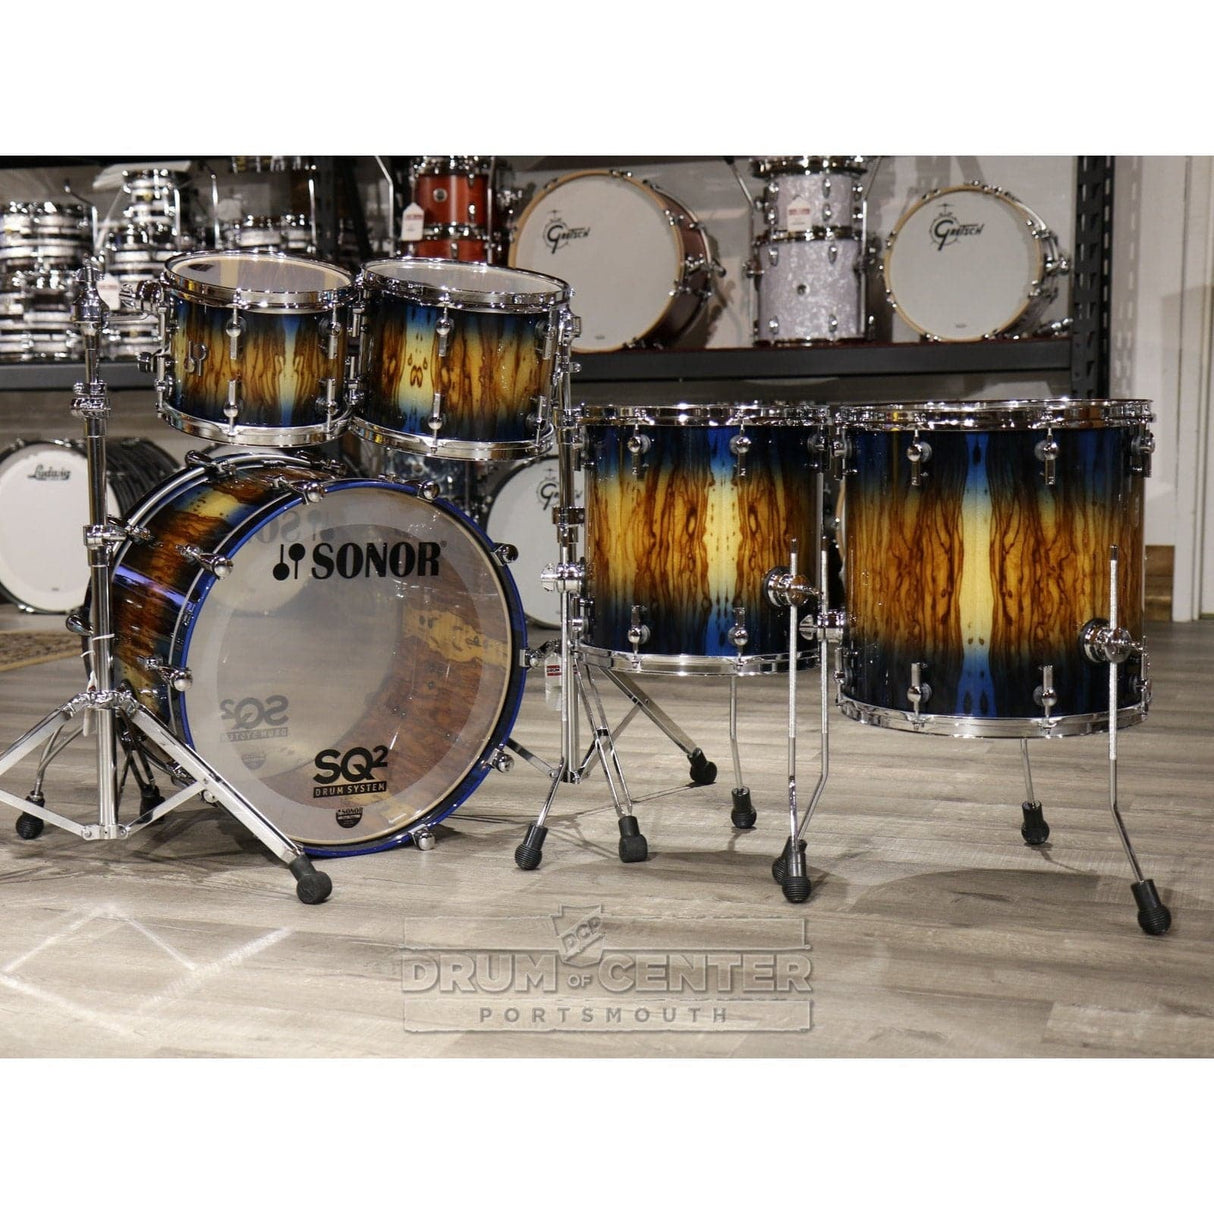 Sonor SQ2 Beech 5pc Drum Set Candy Blue Burst Over African Marble Gloss | 1029731-2